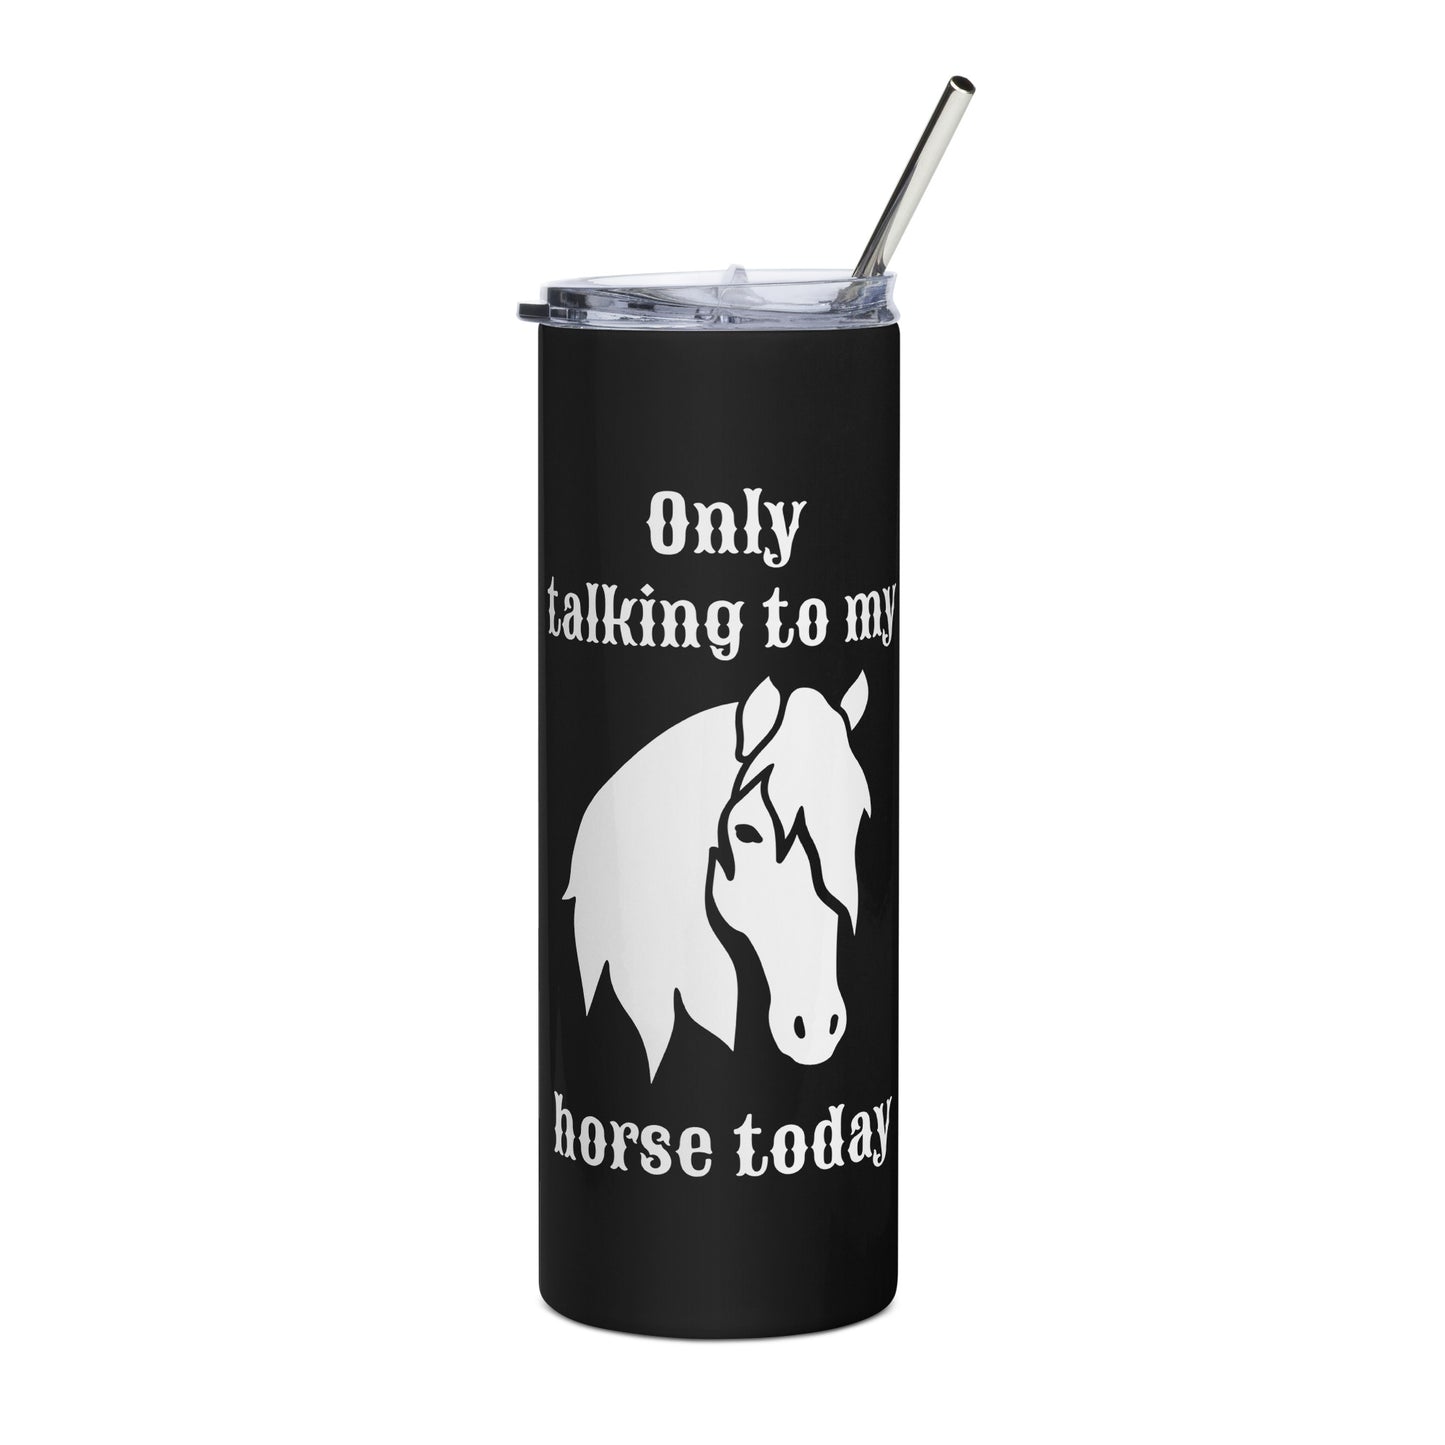 Only Talking to my Horse Today - Black - Stainless steel tumbler